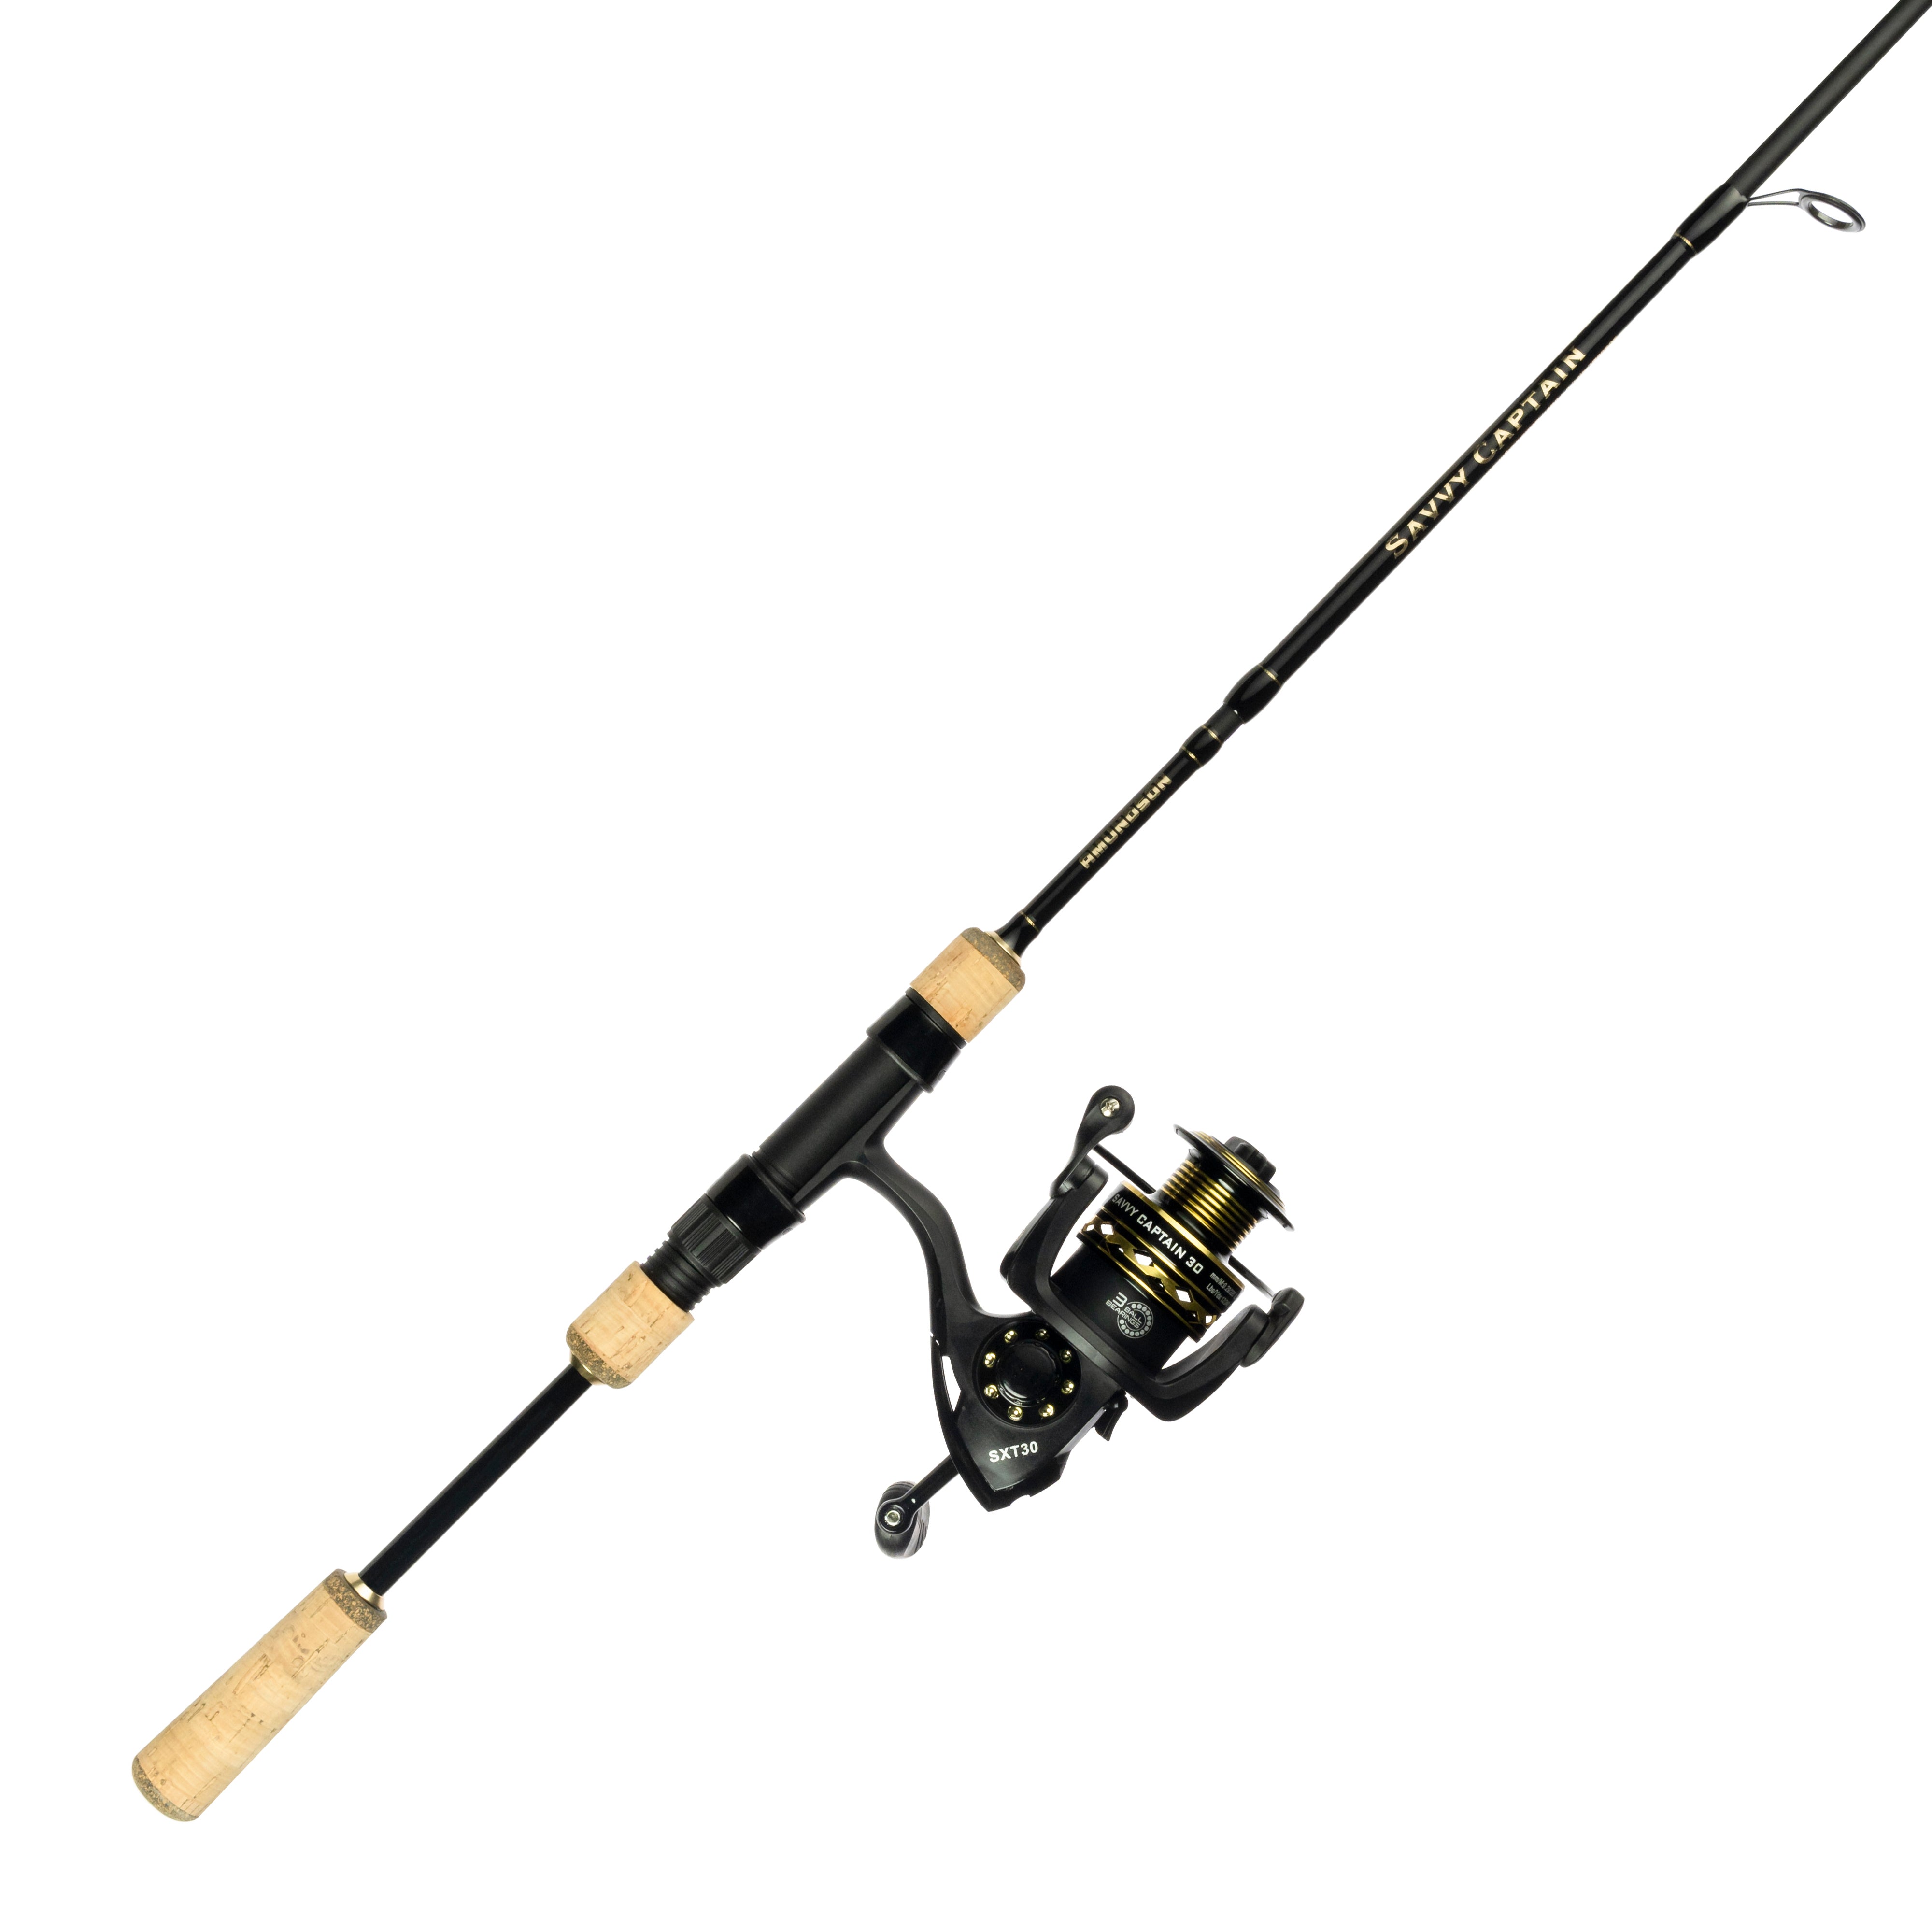 PLUSINNO Freedom Traveler Spinning Fishing Rod and Reel Combos, 6